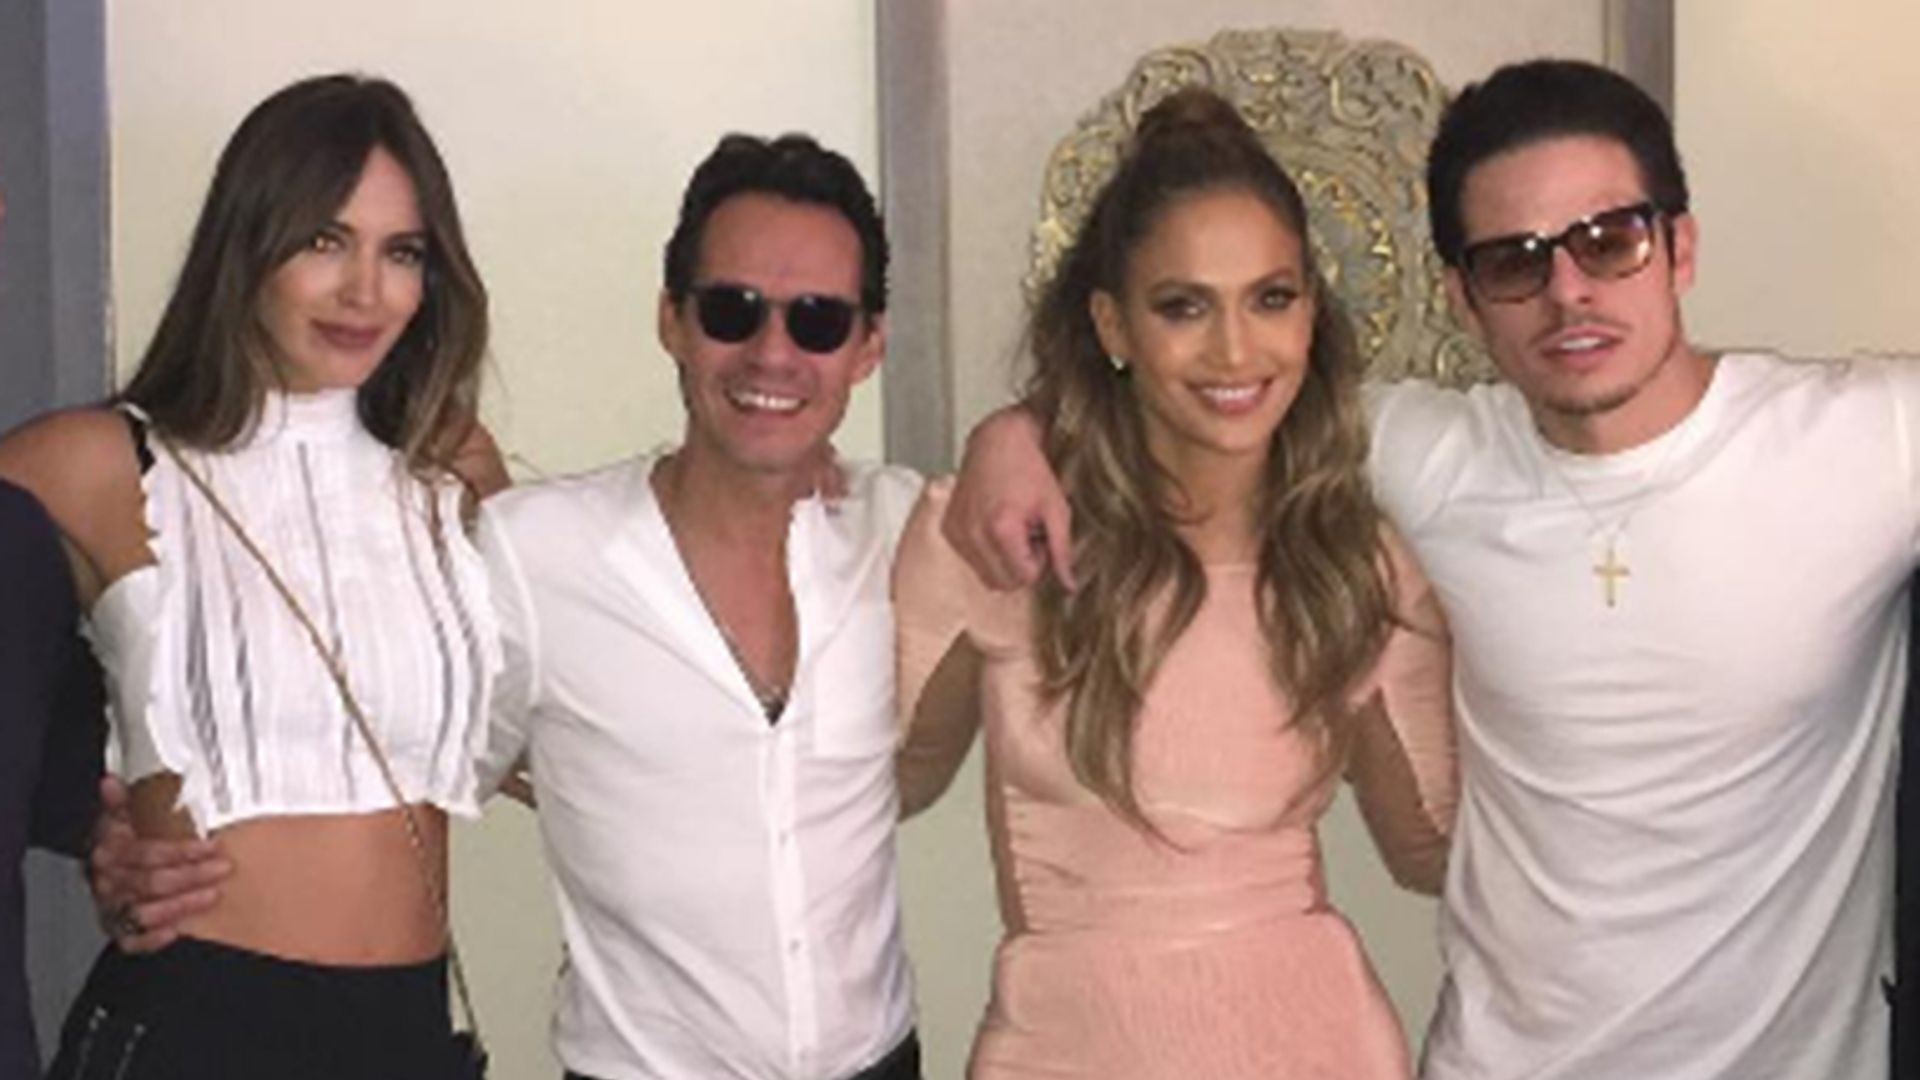 Jennifer Lopez and Marc Anthony reunite with their significant others in sweet snap